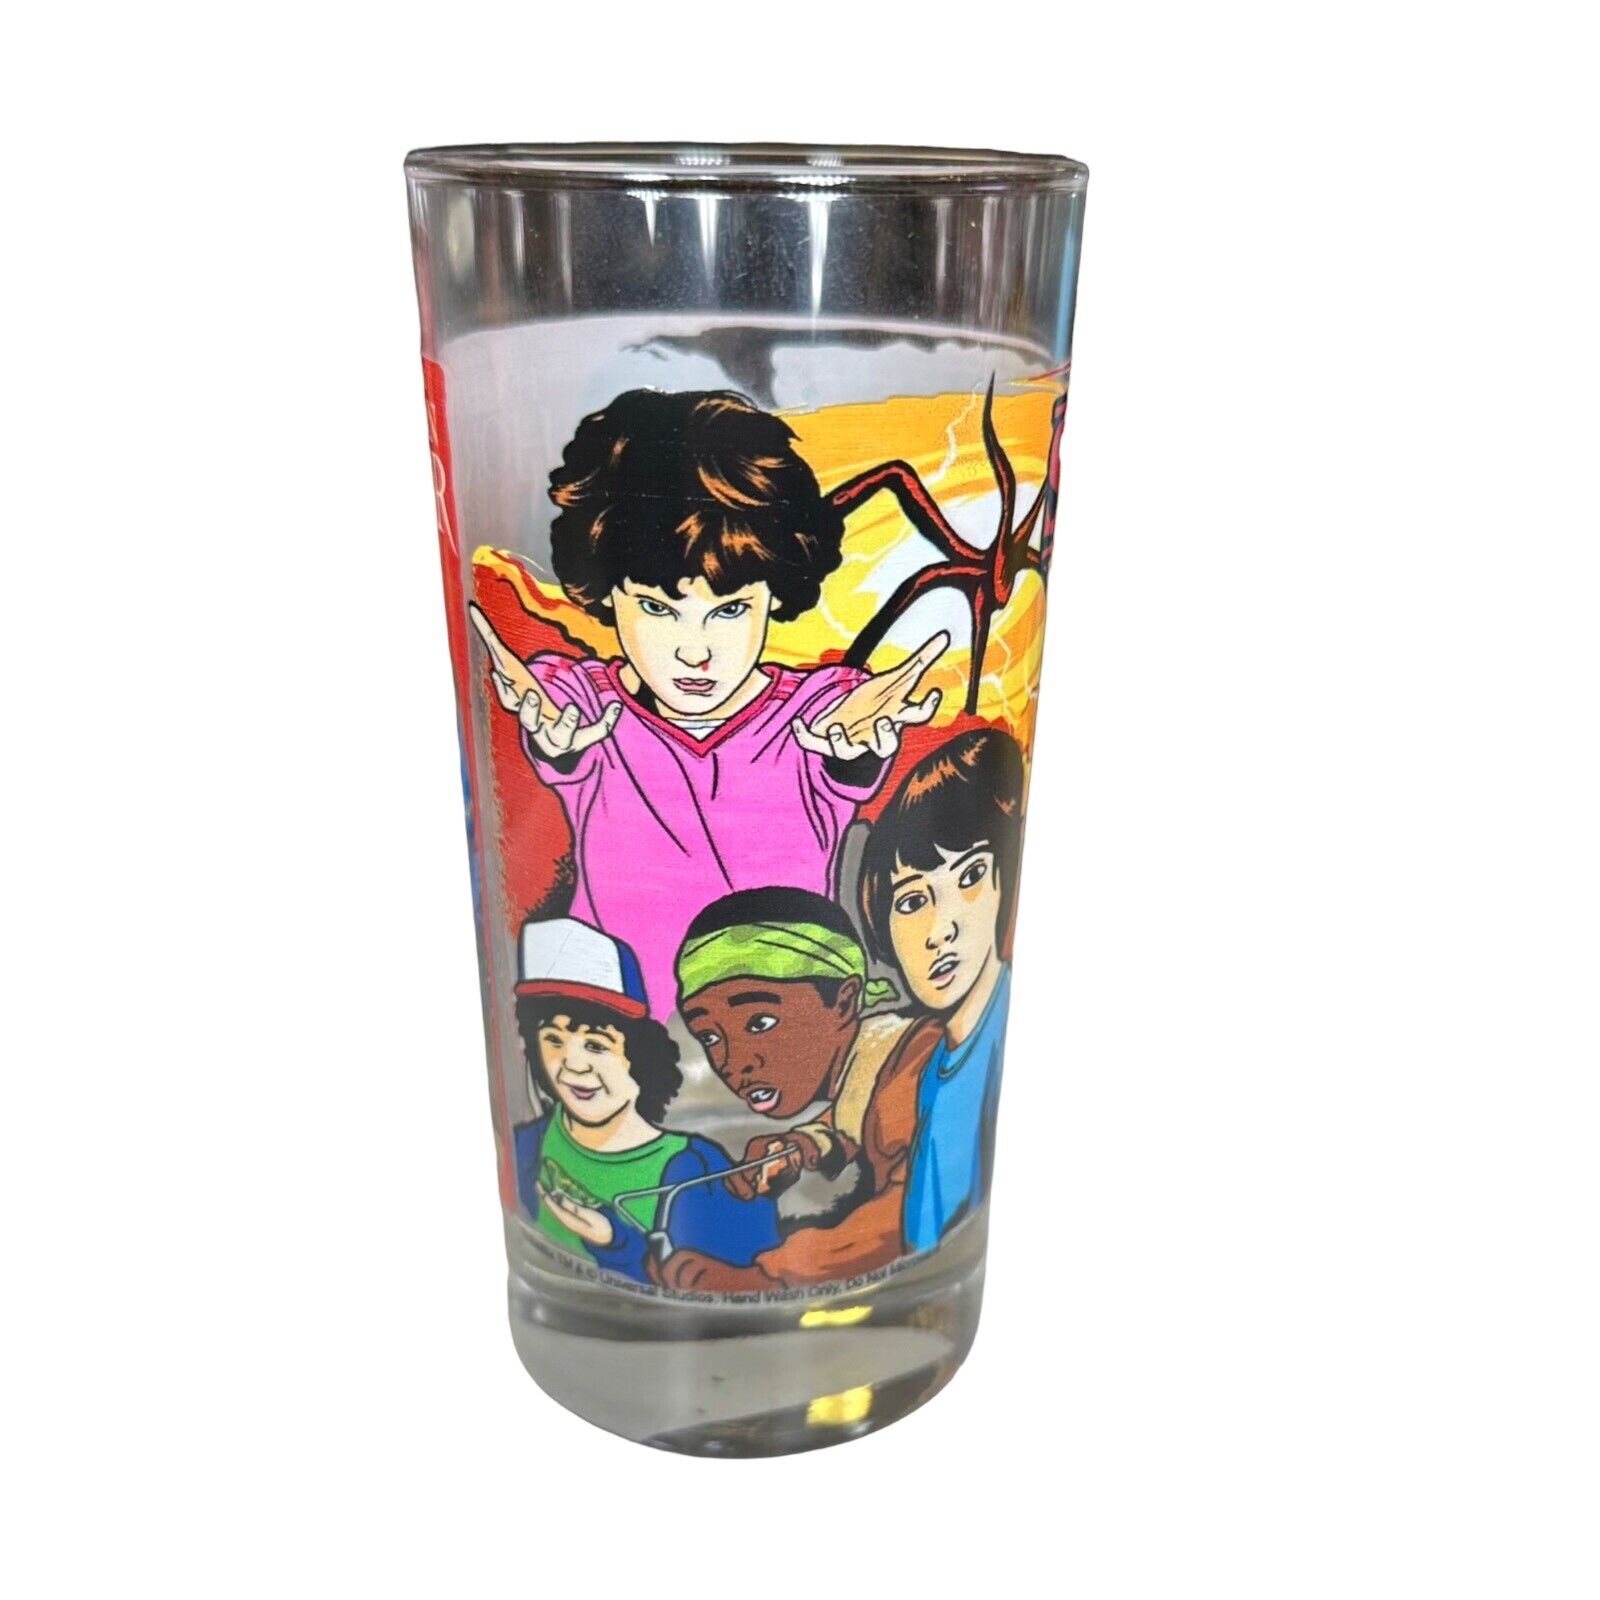 2019 Universal Studios Halloween Horror Nights Stranger Things Collectible Glass